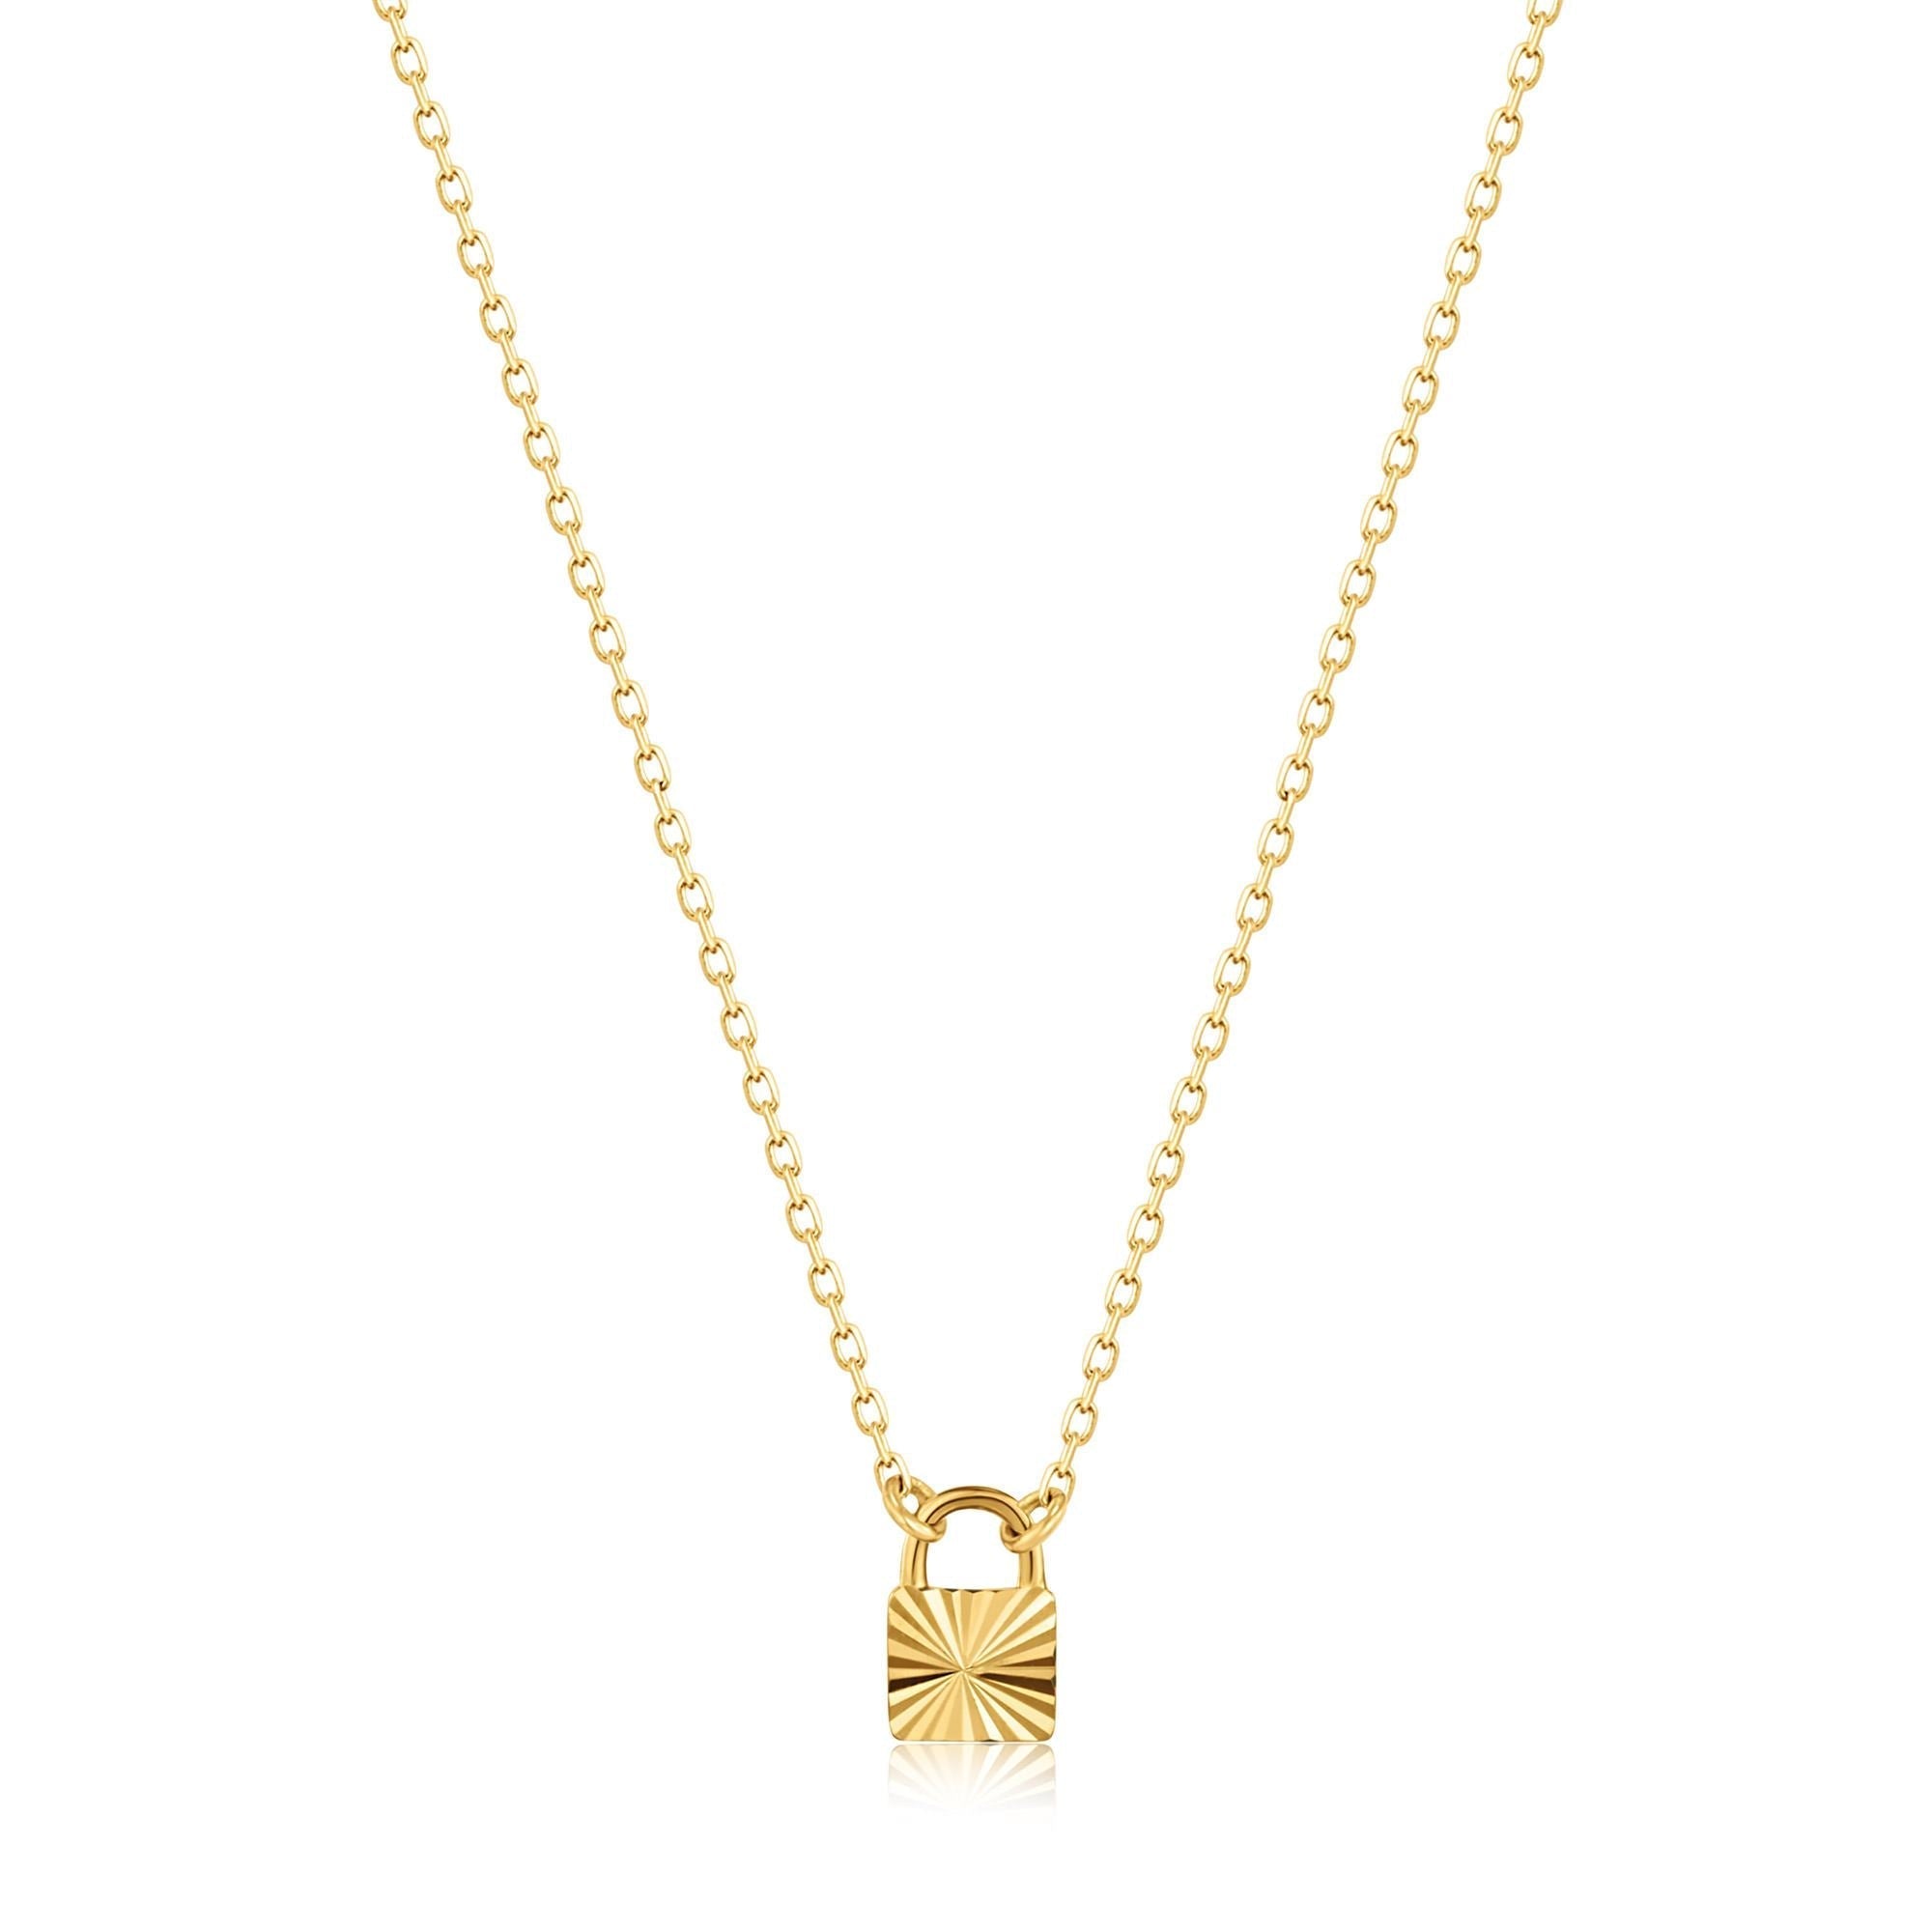 Ania Haie 14ct Gold Padlock Necklace